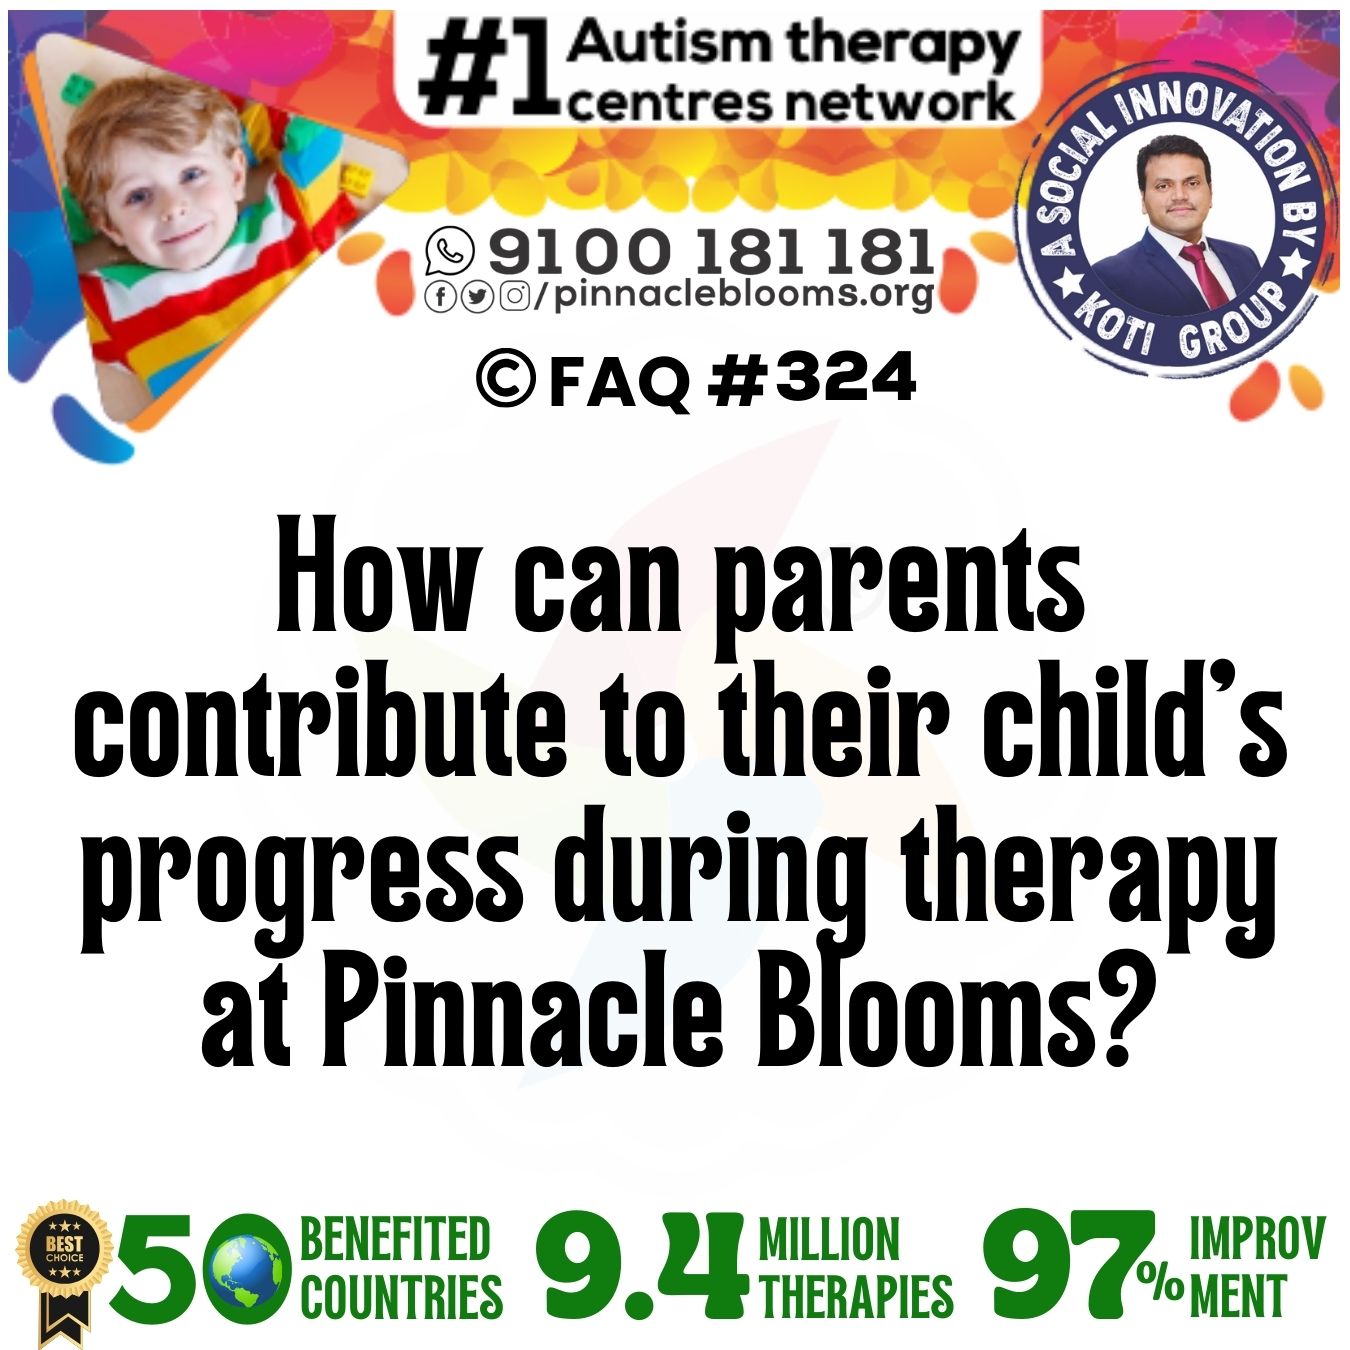 How can parents contribute to their child's progress during therapy at Pinnacle Blooms?